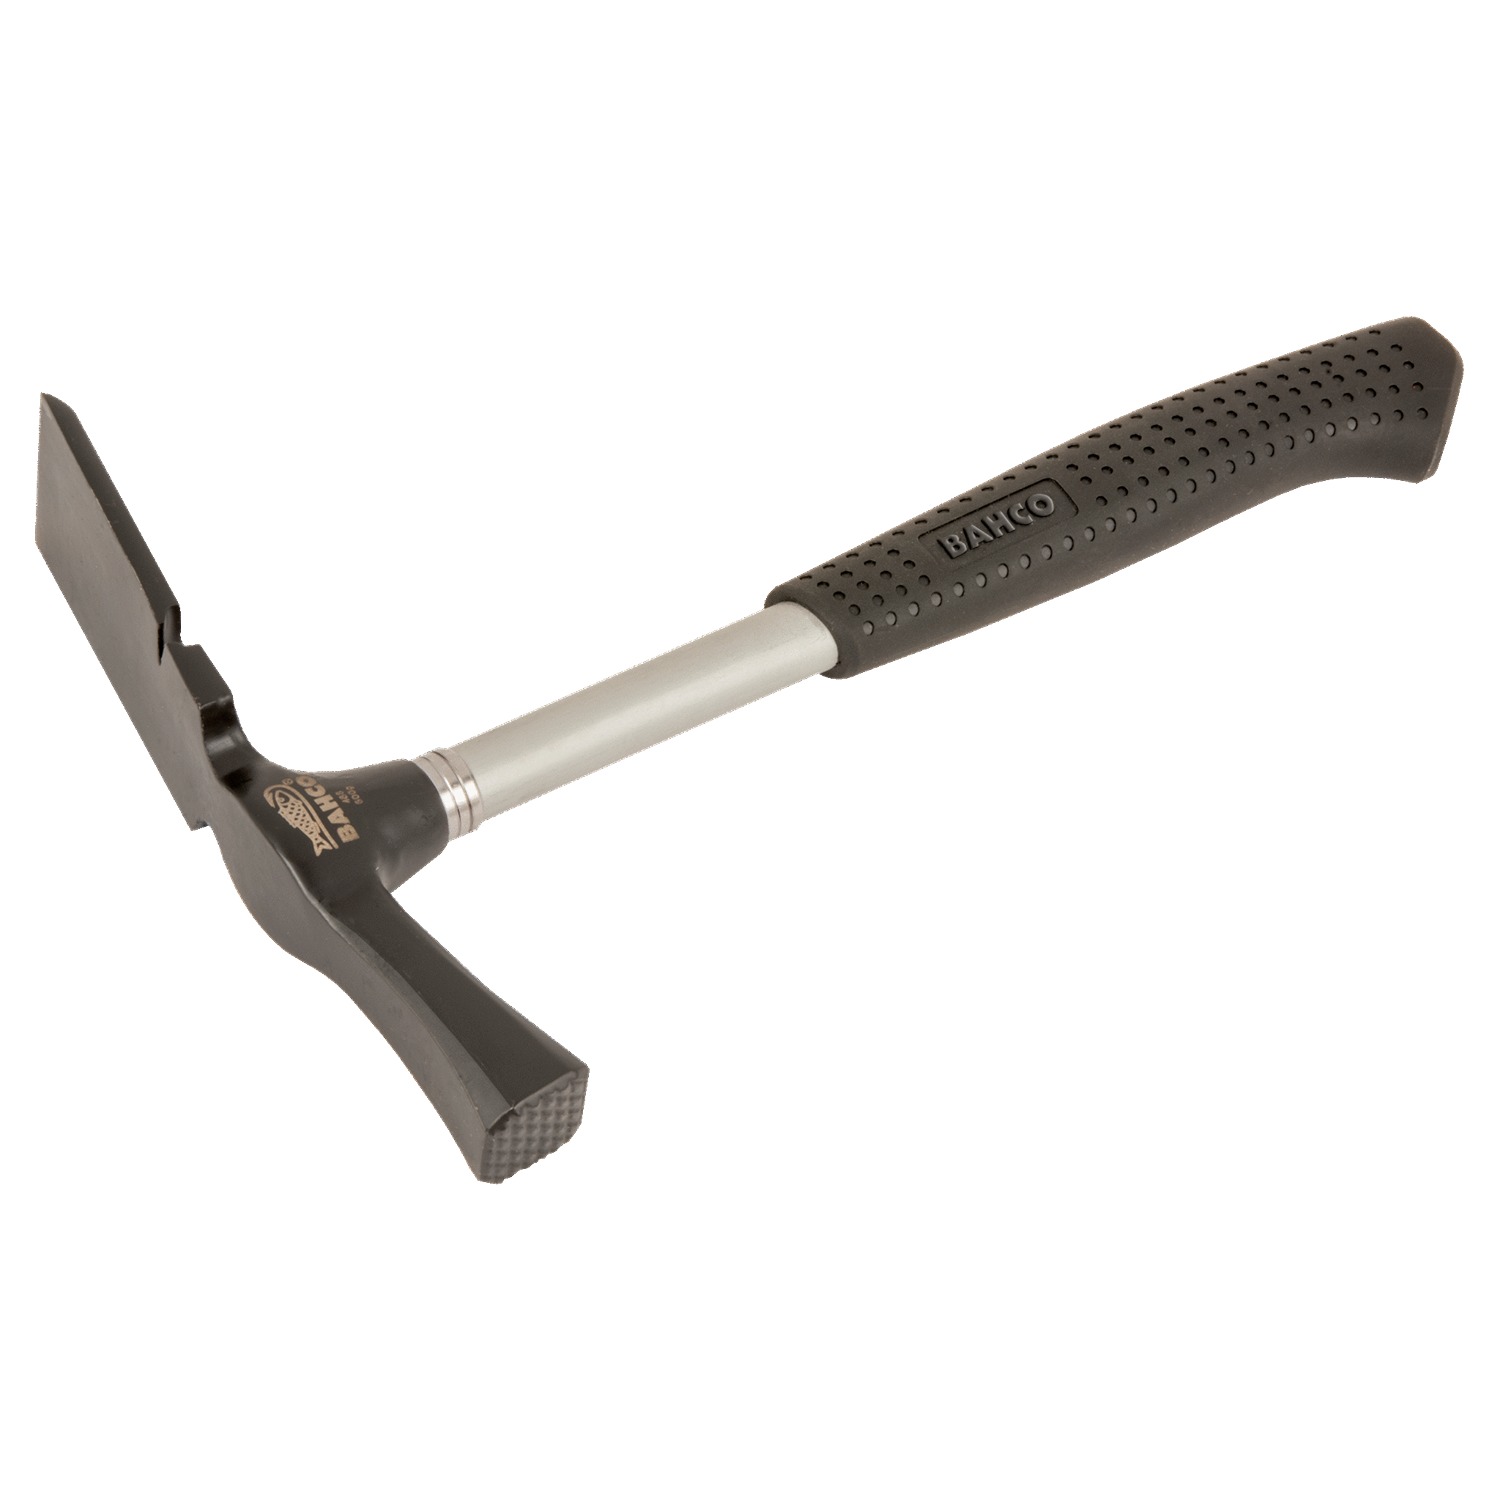 BAHCO 486 Bricklayer Hammer with Rubber Grip (BAHCO Tools) - Premium Bricklayer Hammer from BAHCO - Shop now at Yew Aik.